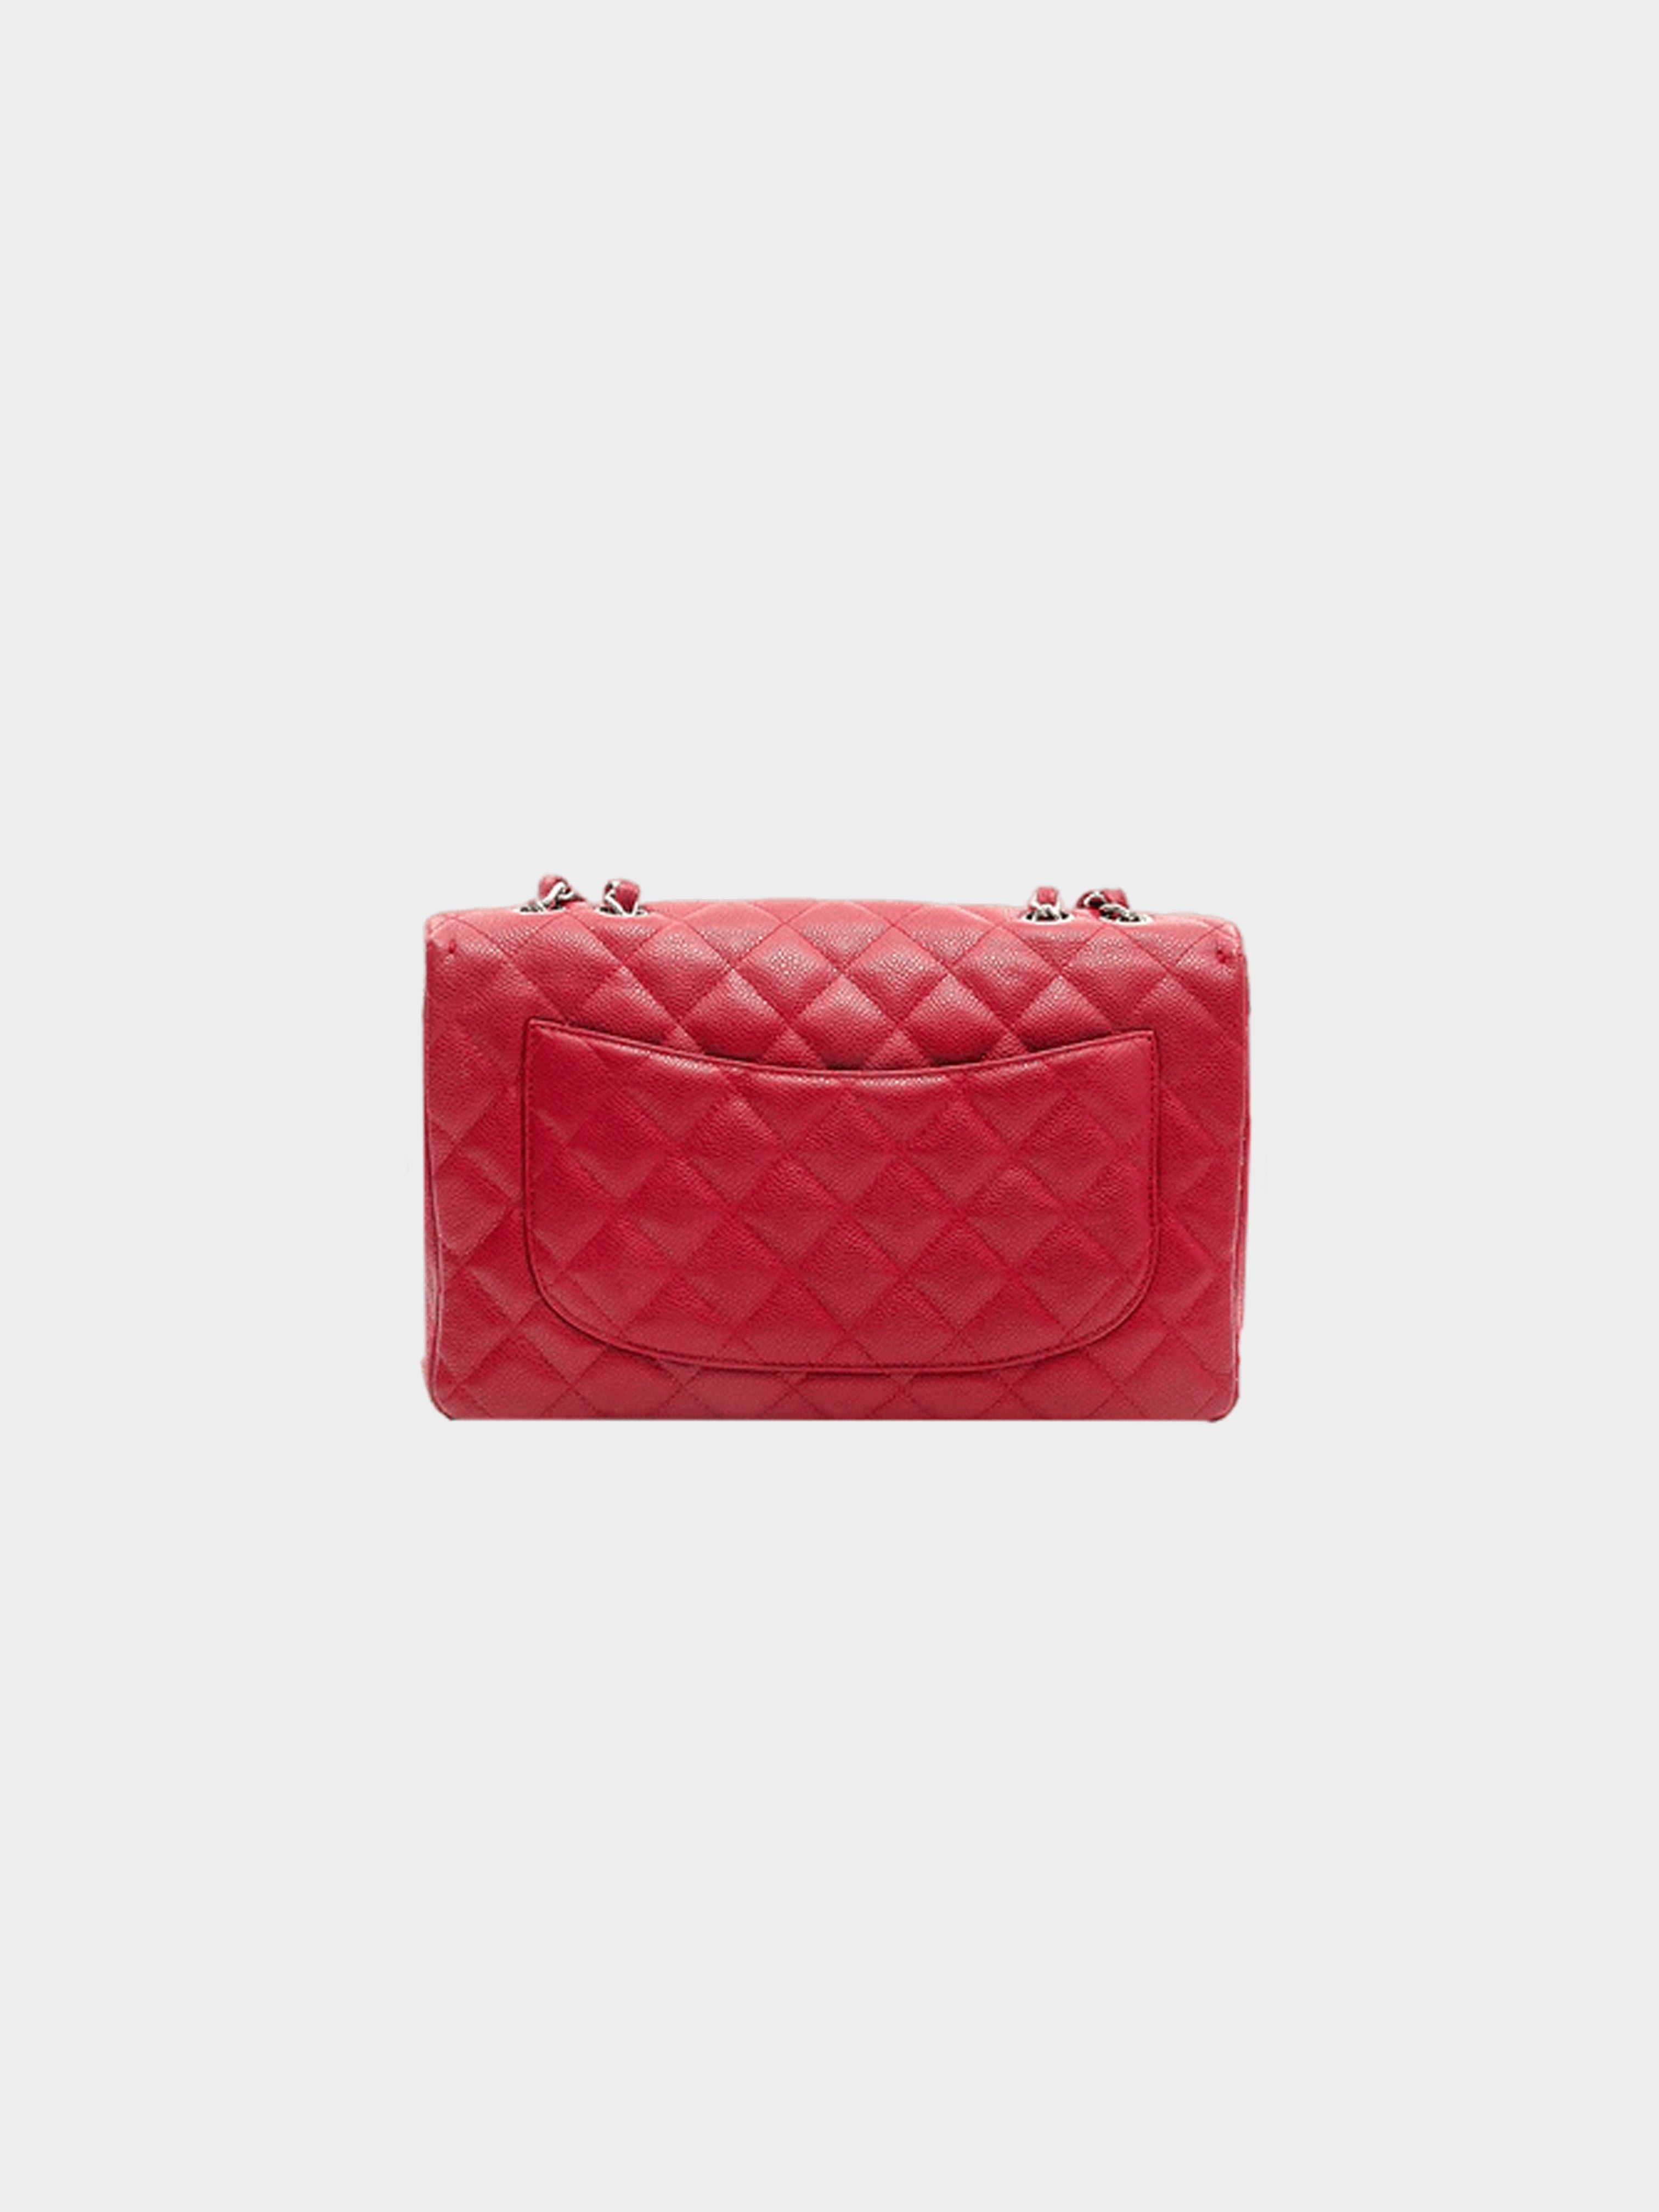 Chanel 2009 Red Classic Flap Bag